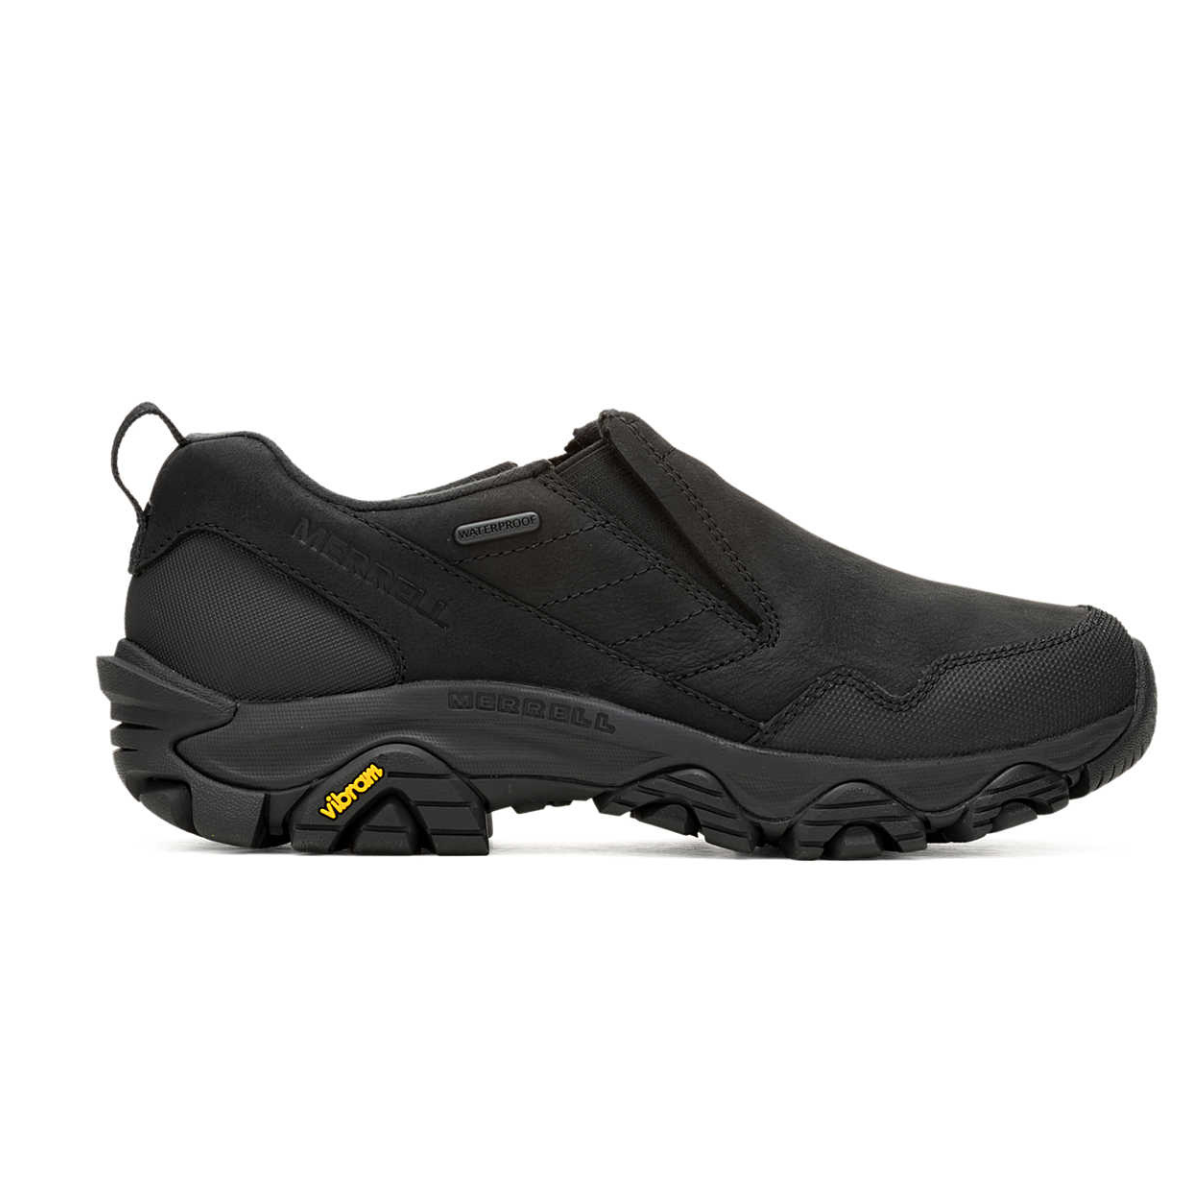 Merrell, ColdPack 3 Thermo Moc Waterproof, Women, Black